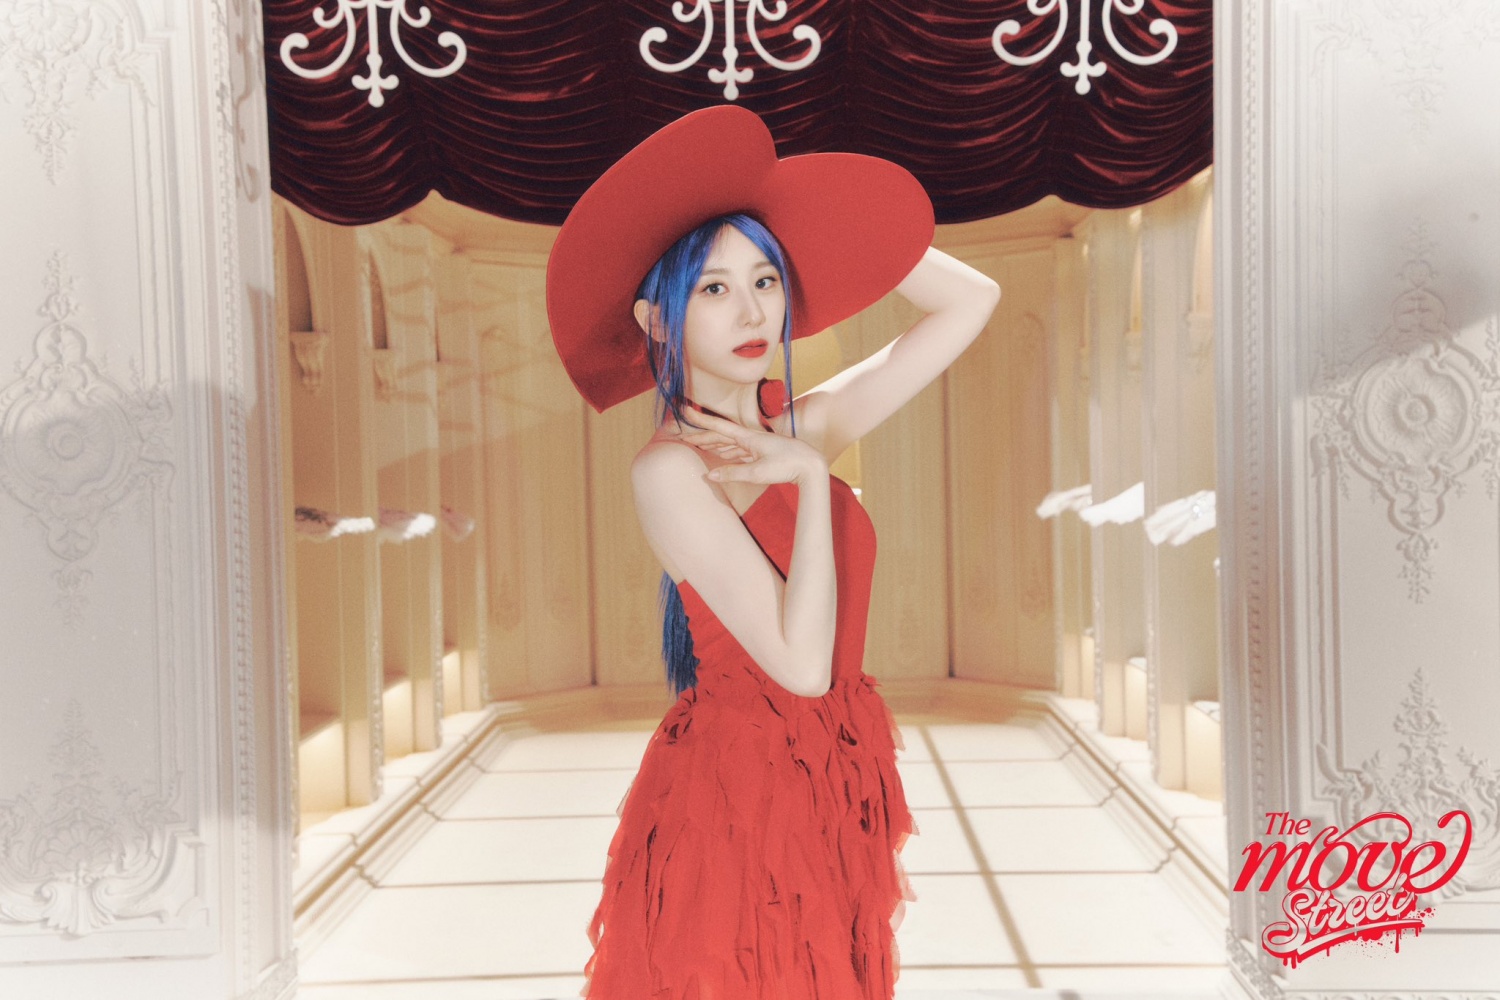 Lee Chae-yeon, ballet core sporty look transformation... Free-spirited new album concept